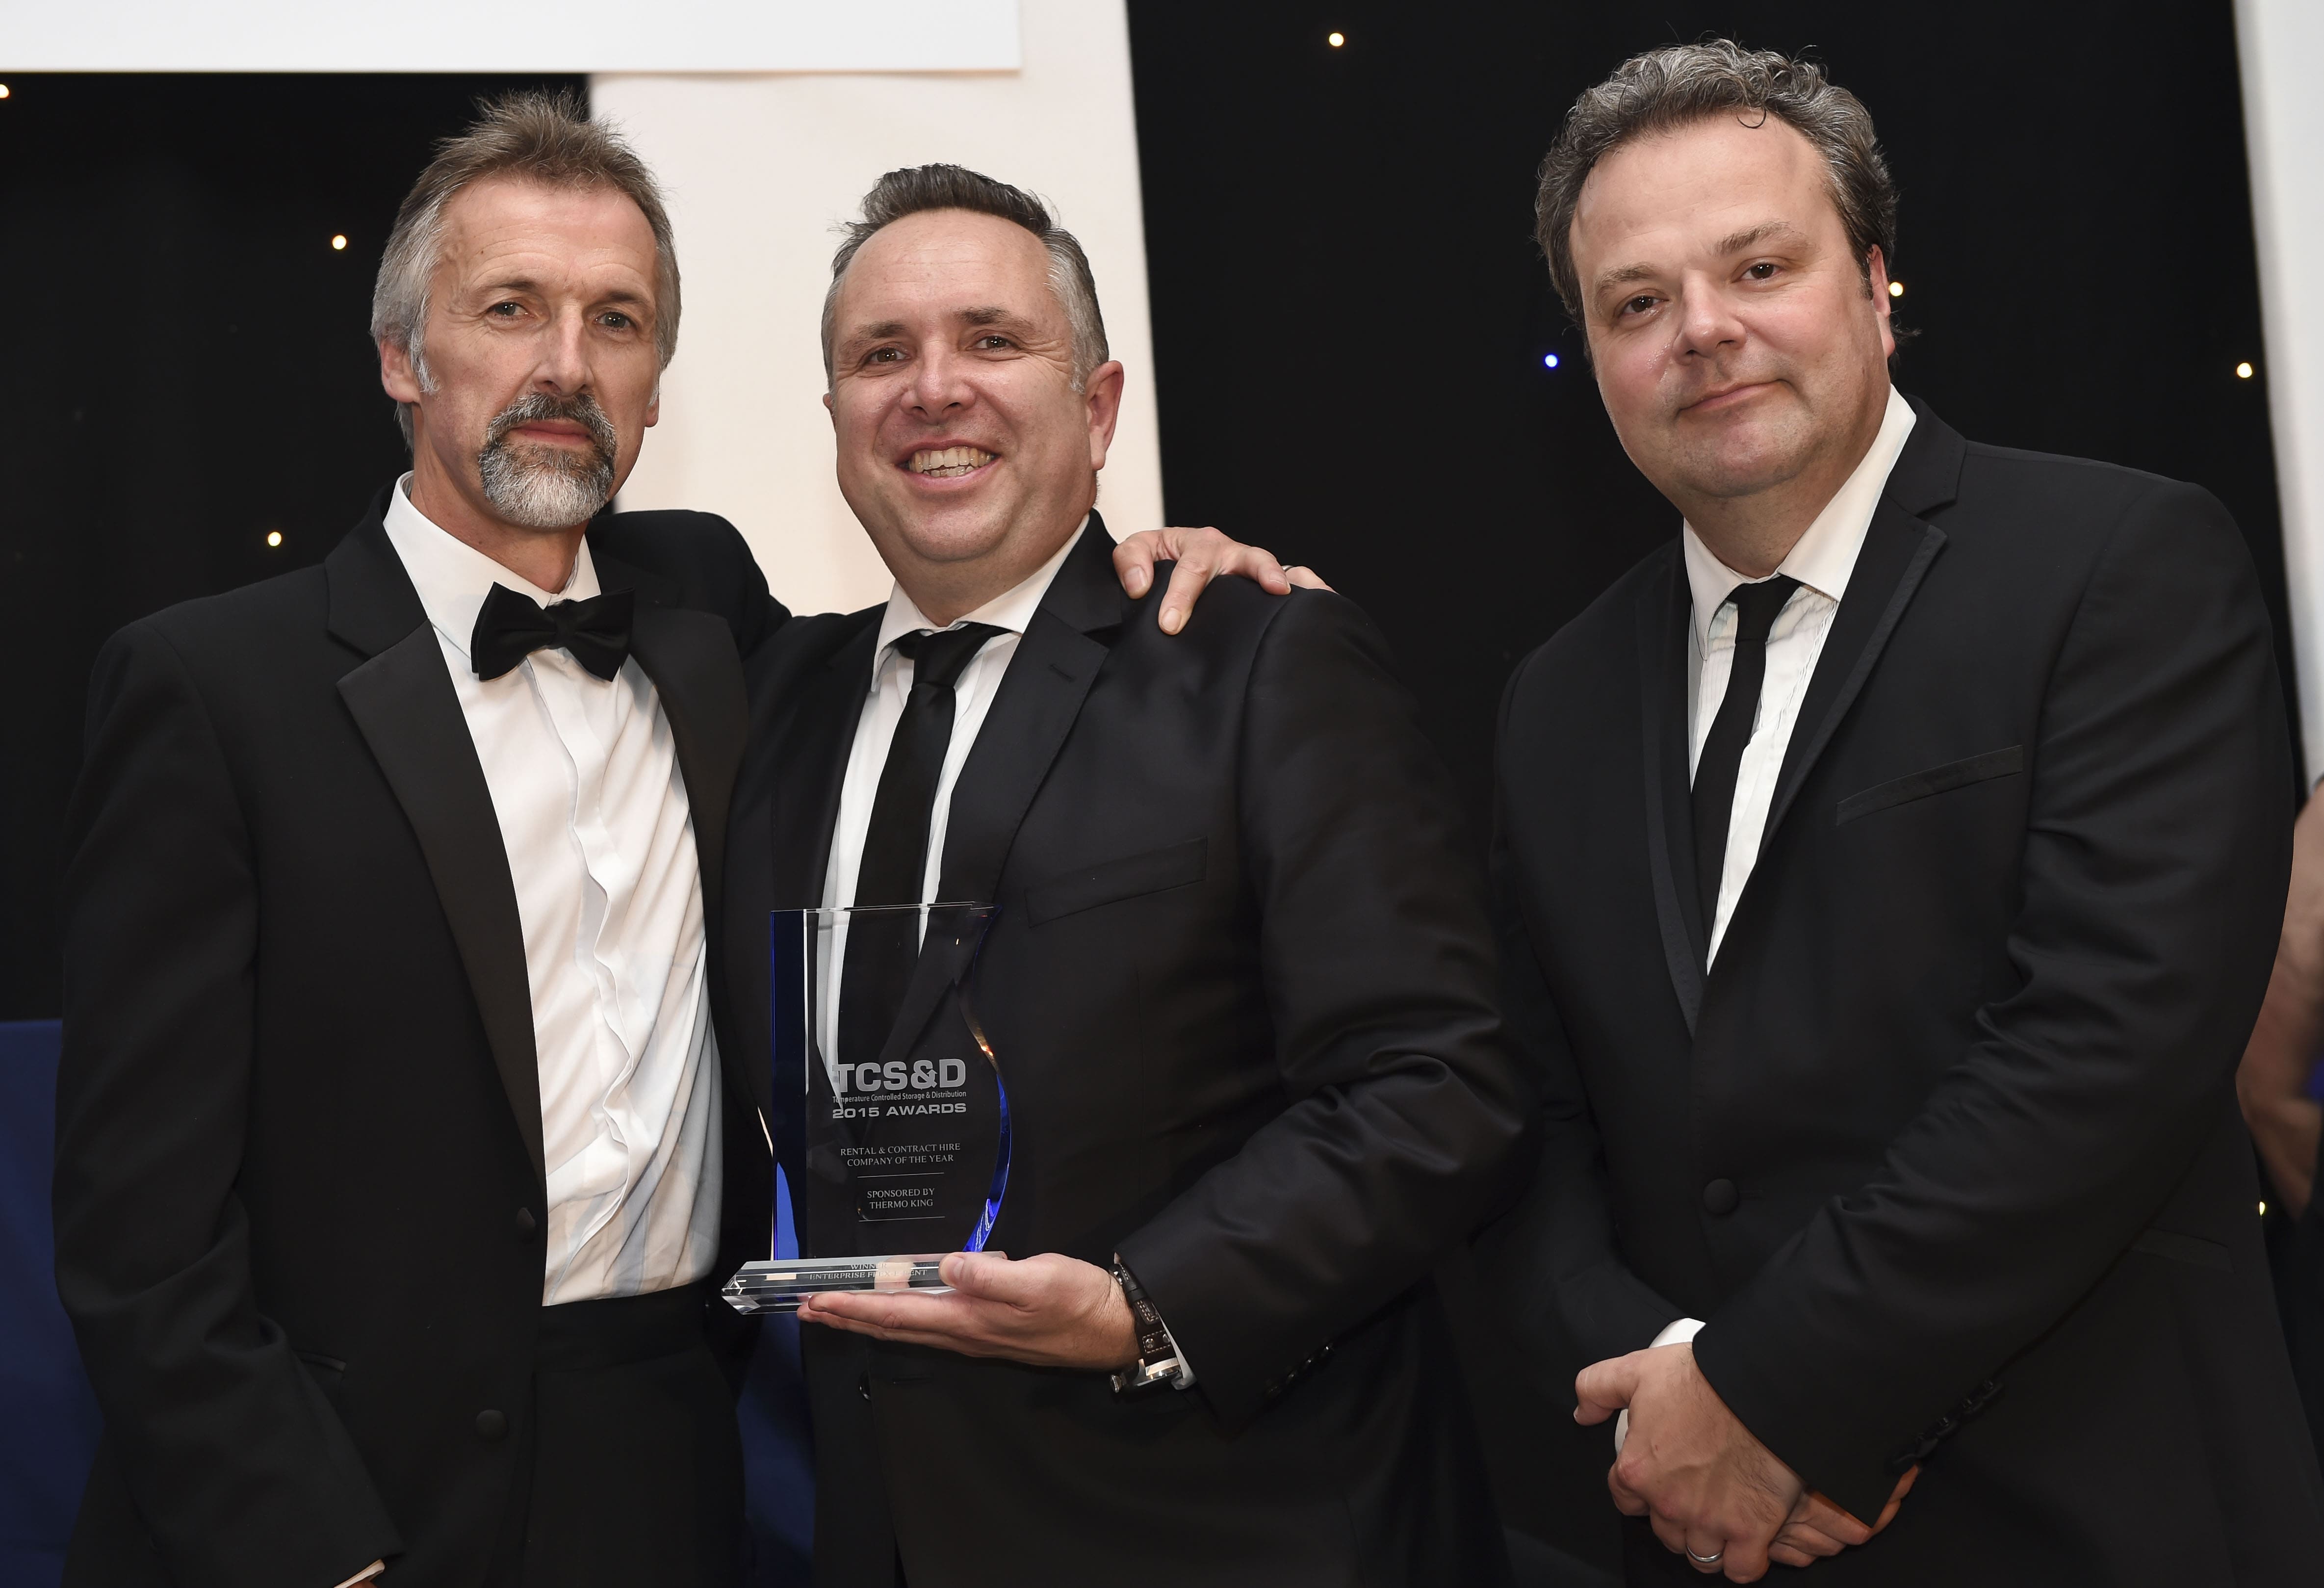 [News] Enterprise Flex-E-Rent Wins Top Industry Award for Second Consecutive Year